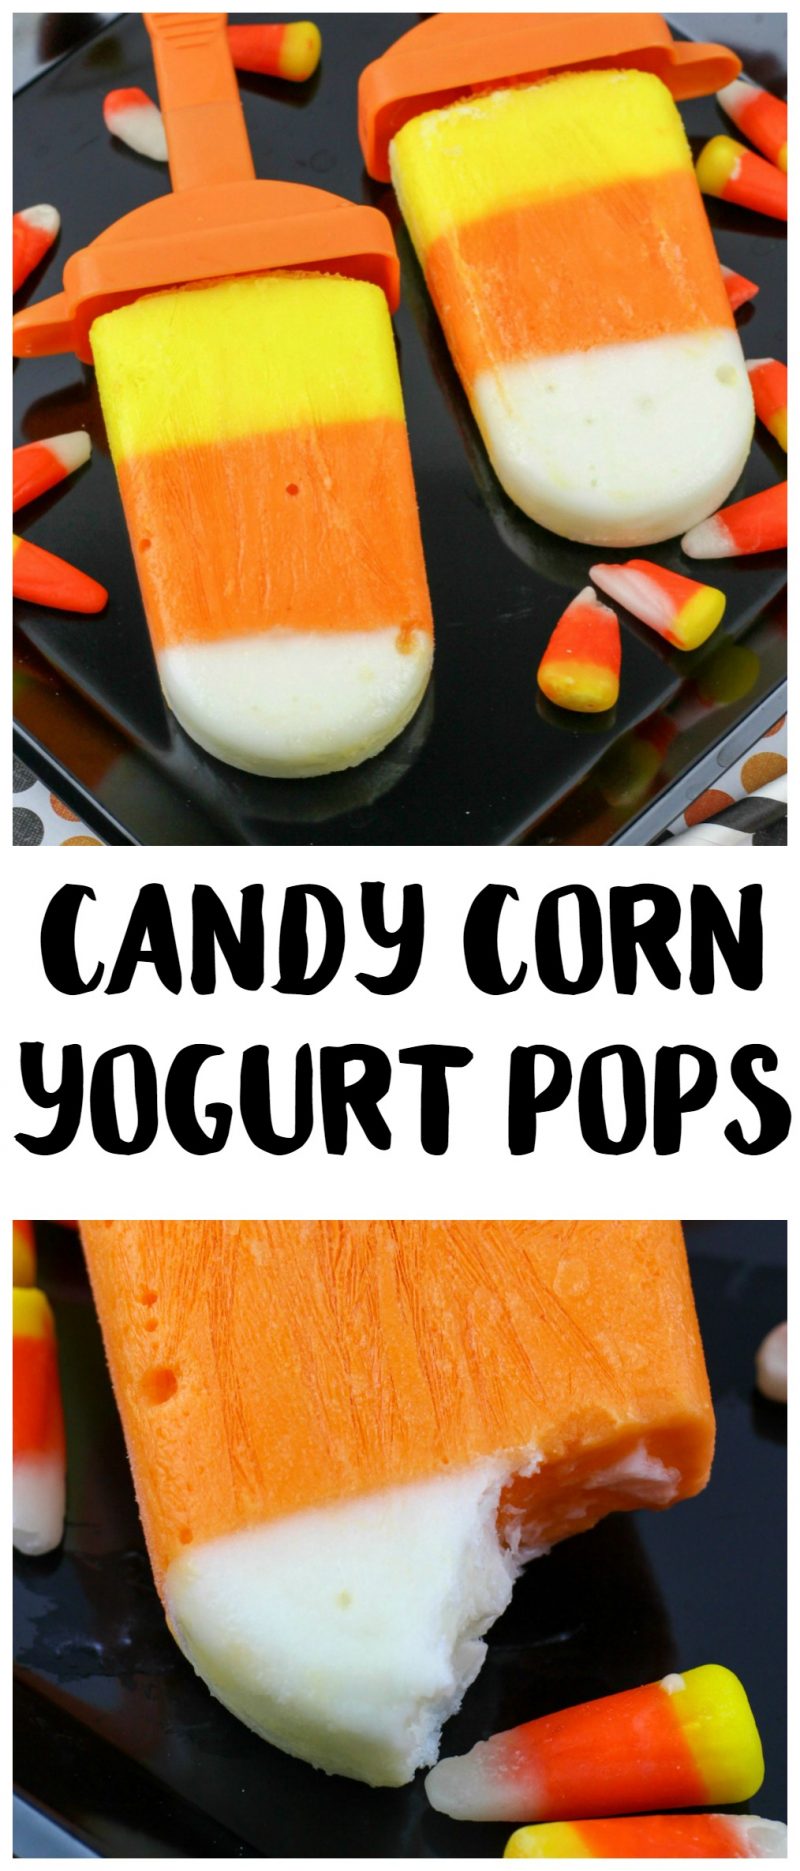 These Candy Corn Yogurt Pops are an easy, delicious way to get your fix of one of the best kinds of Halloween treats! These ice pops taste like desserts but are actually healthy, and are an easy recipe to enjoy- no baking required!